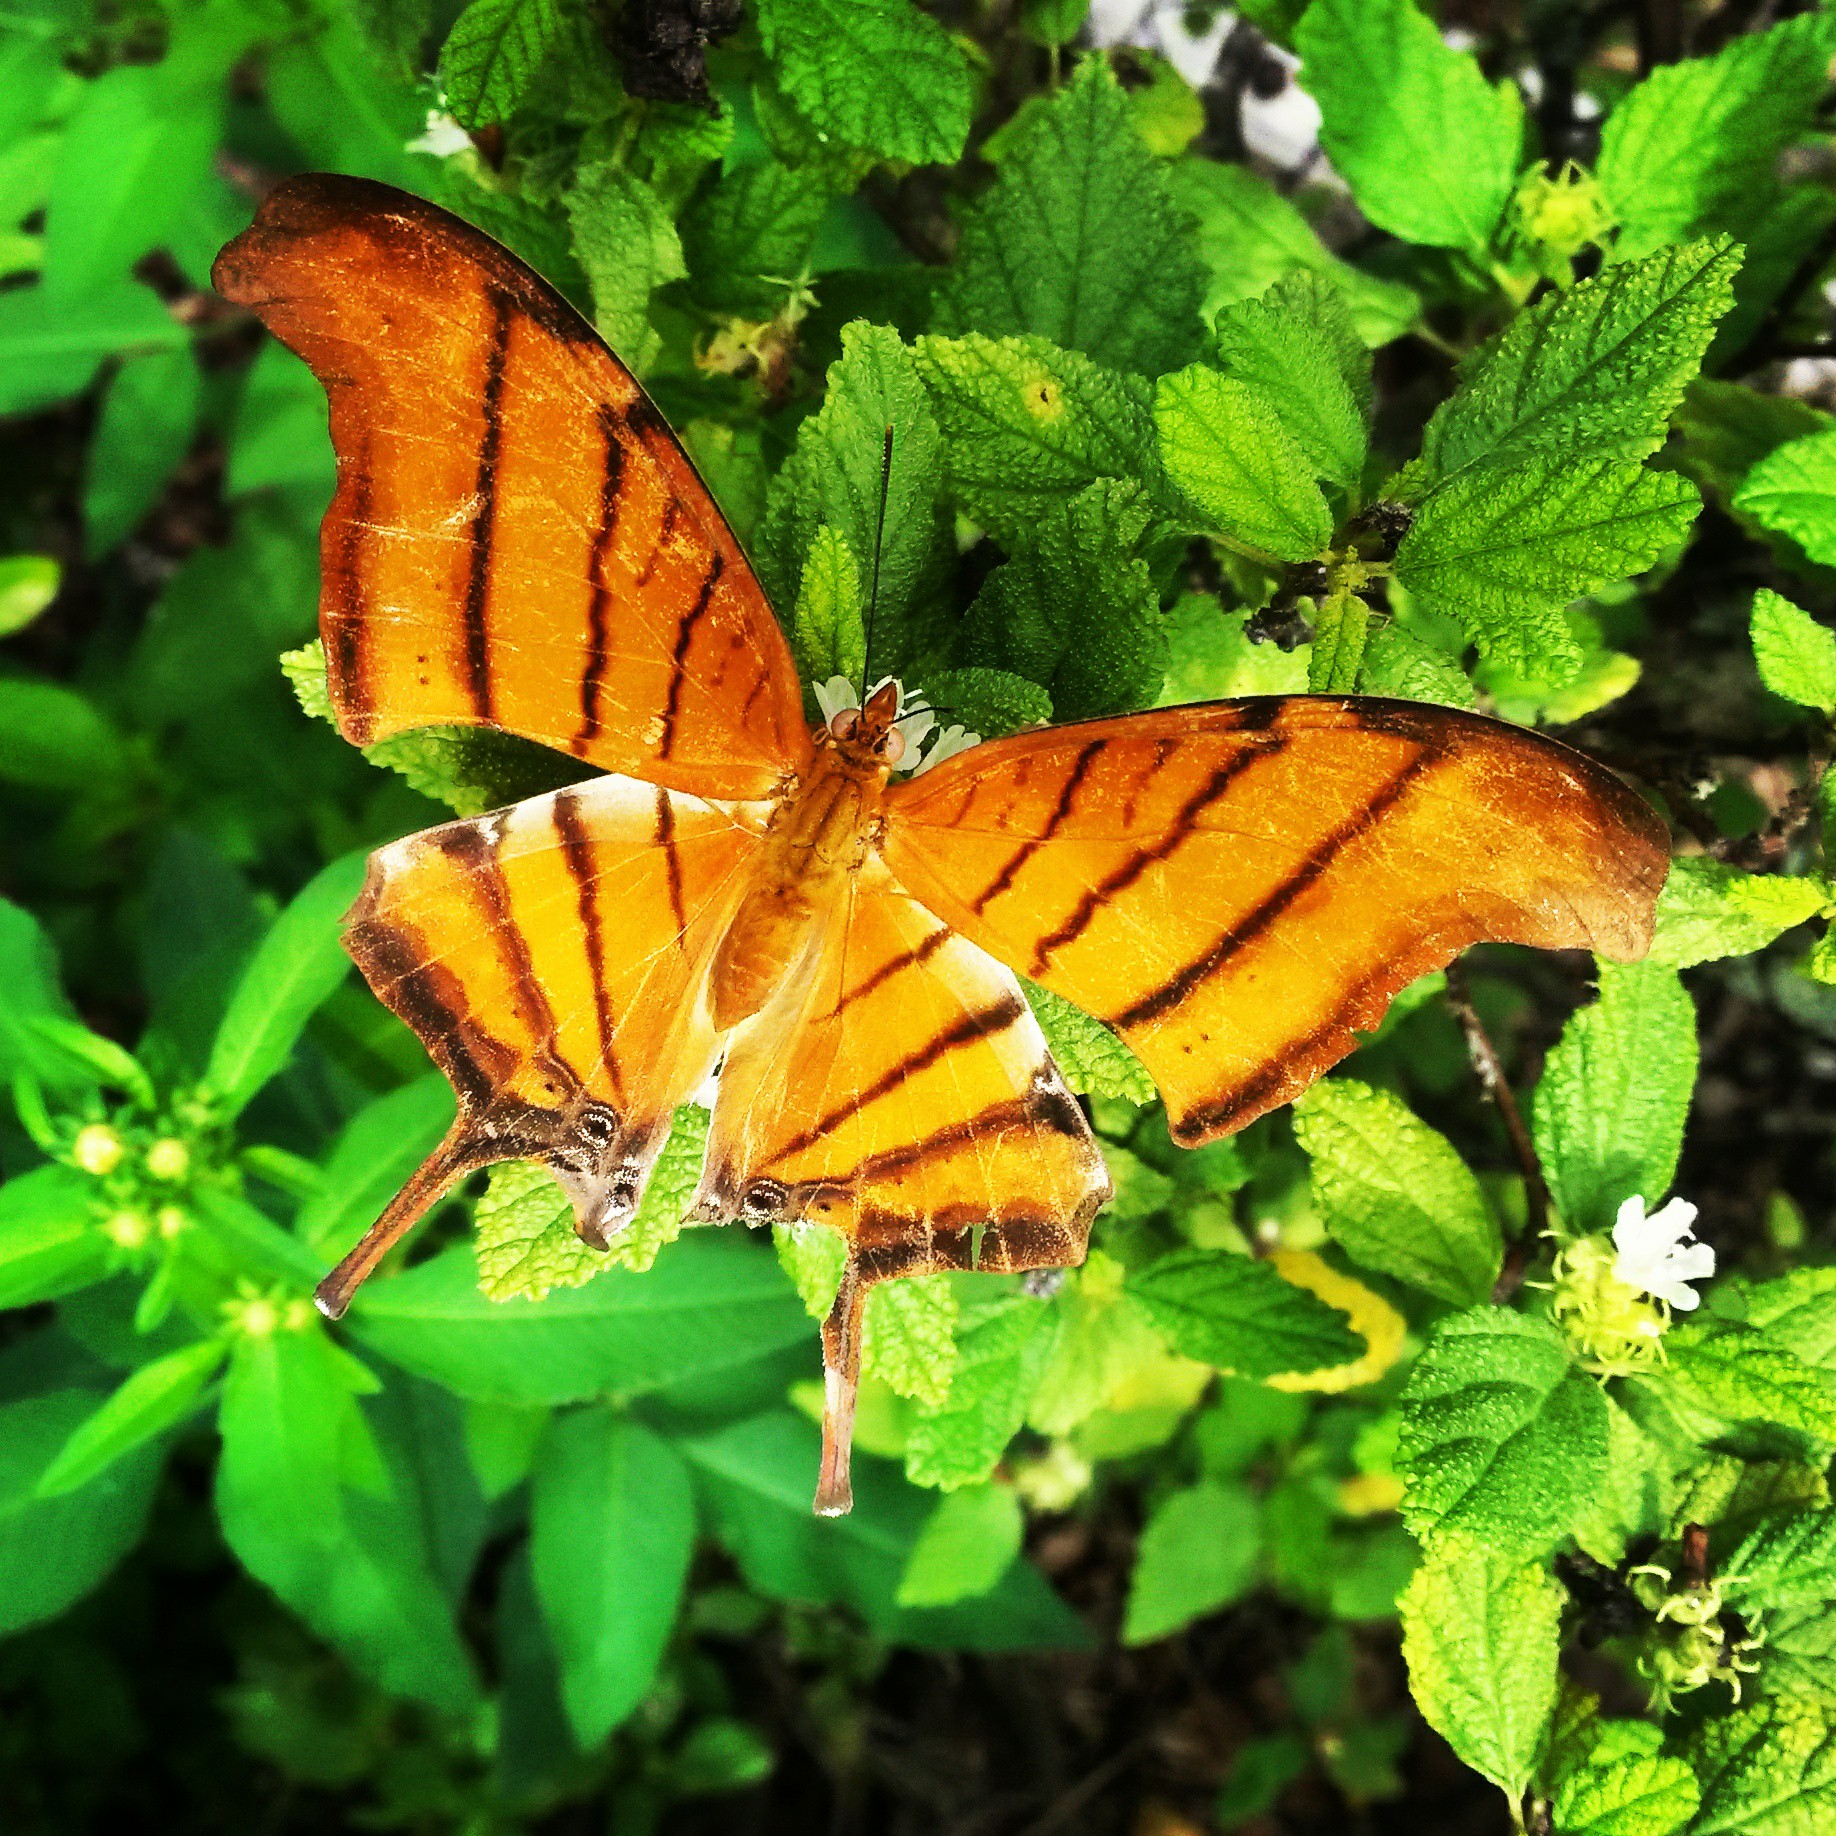 An orange butterfly with thin brown stripes perched on a green plant.